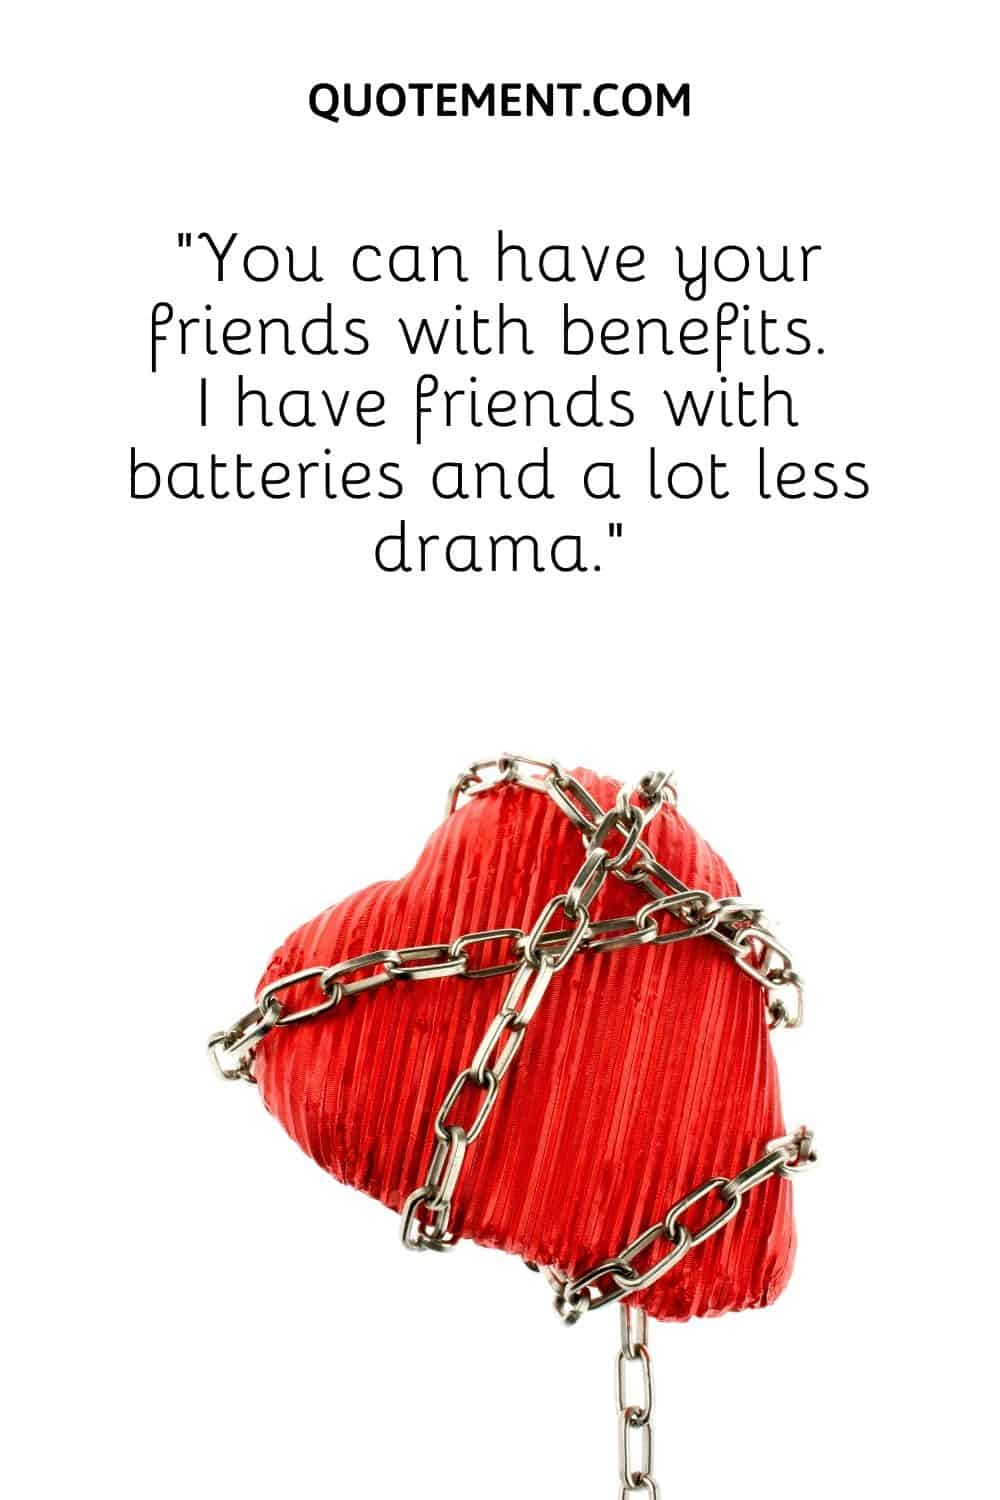 “You can have your friends with benefits. I have friends with batteries and a lot less drama.”